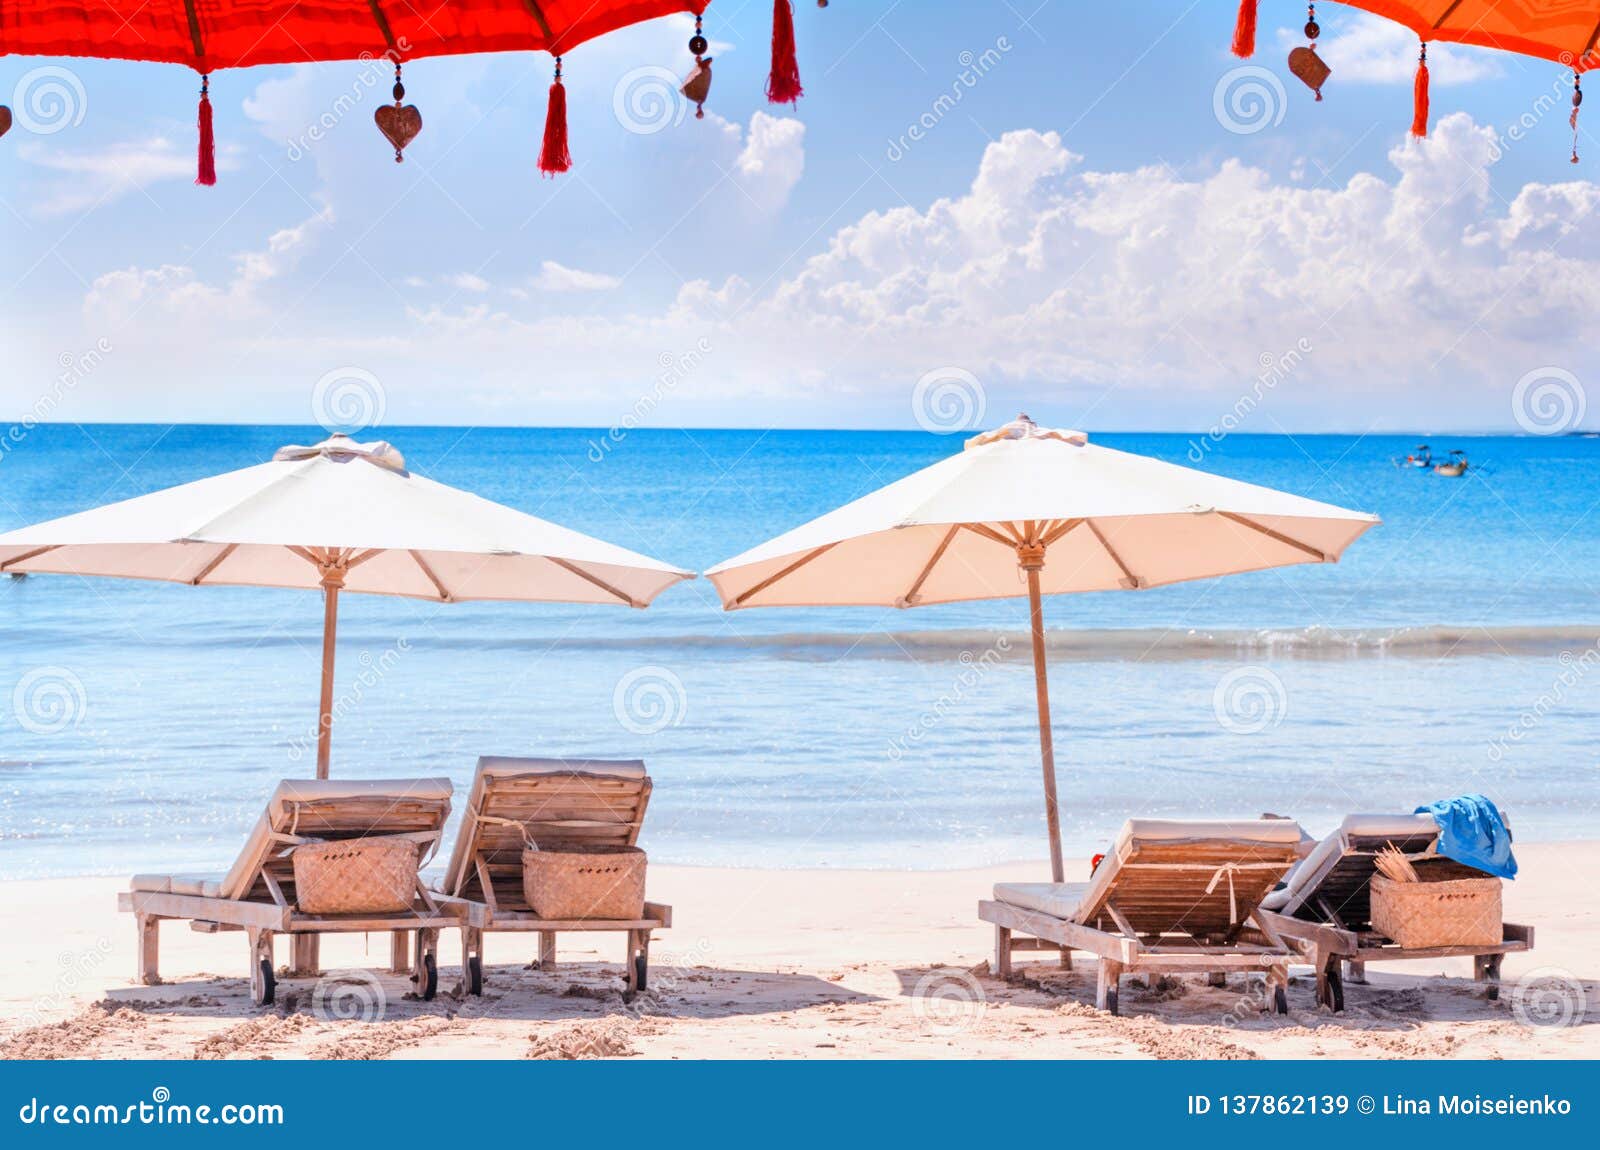 Chairs at Beach. Sun Lounger and Umbrella at Bali Shore Stock Image - Image  of banner, landscape: 137862139